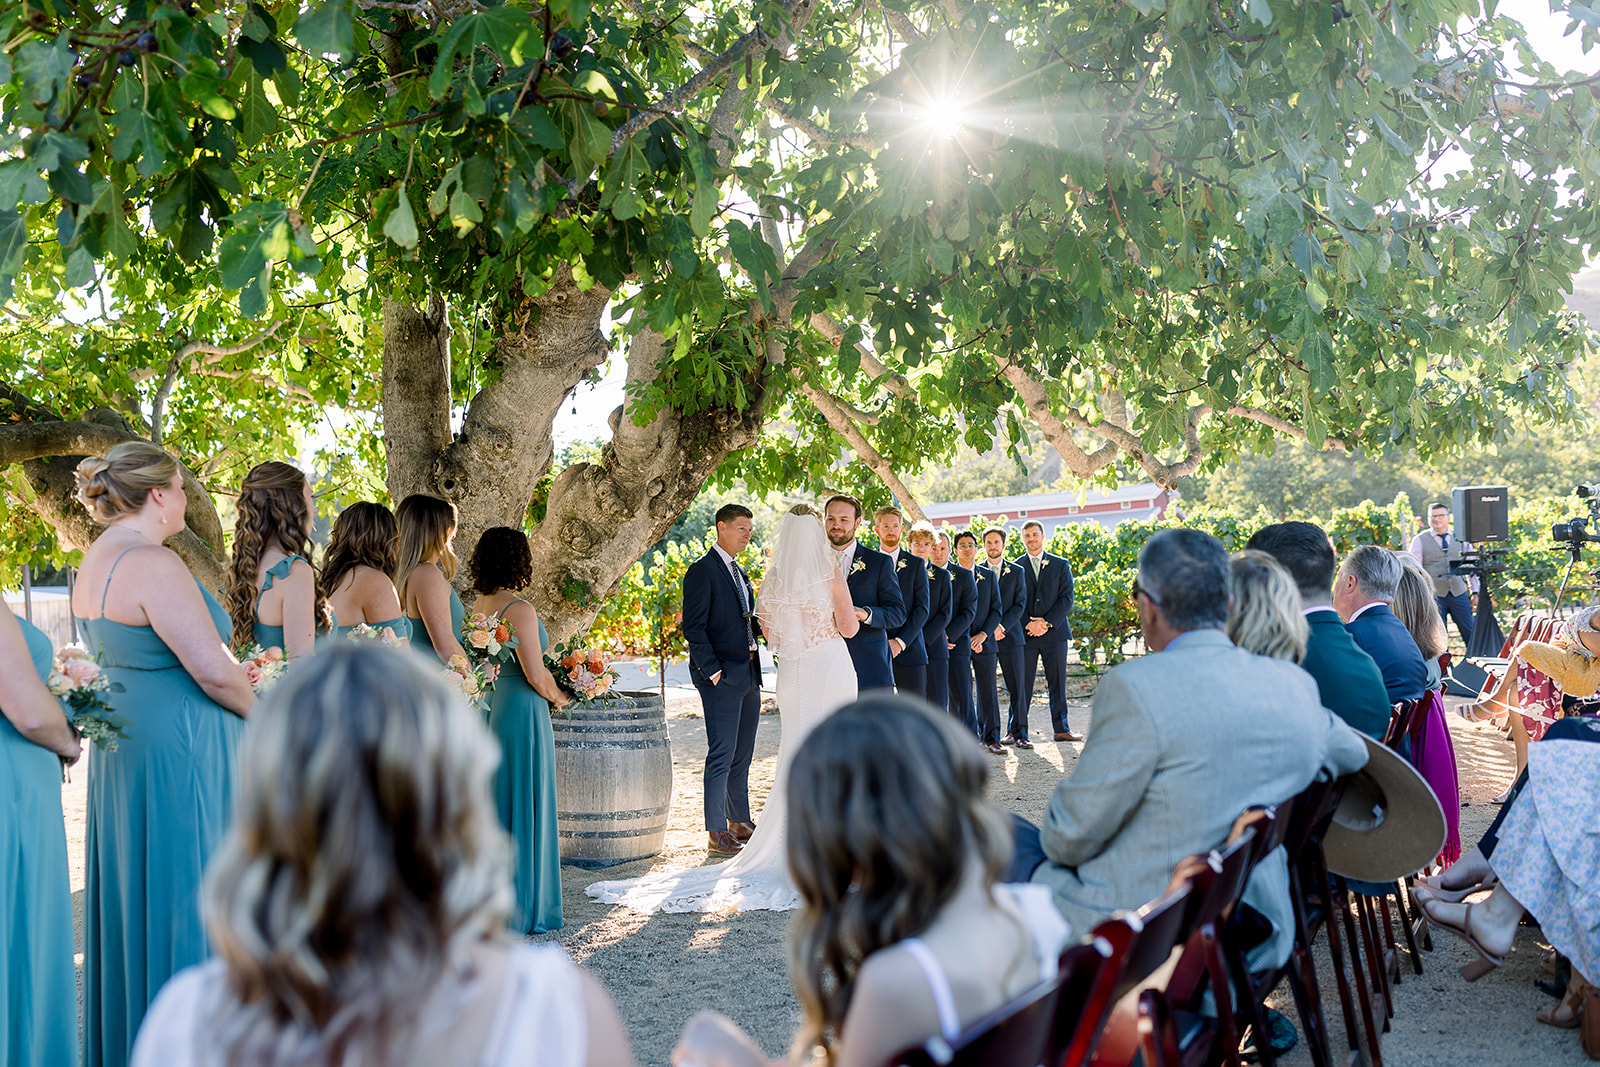 Caroline and Thomas exchanging vows under the picturesque tree at Higuera Ranch.